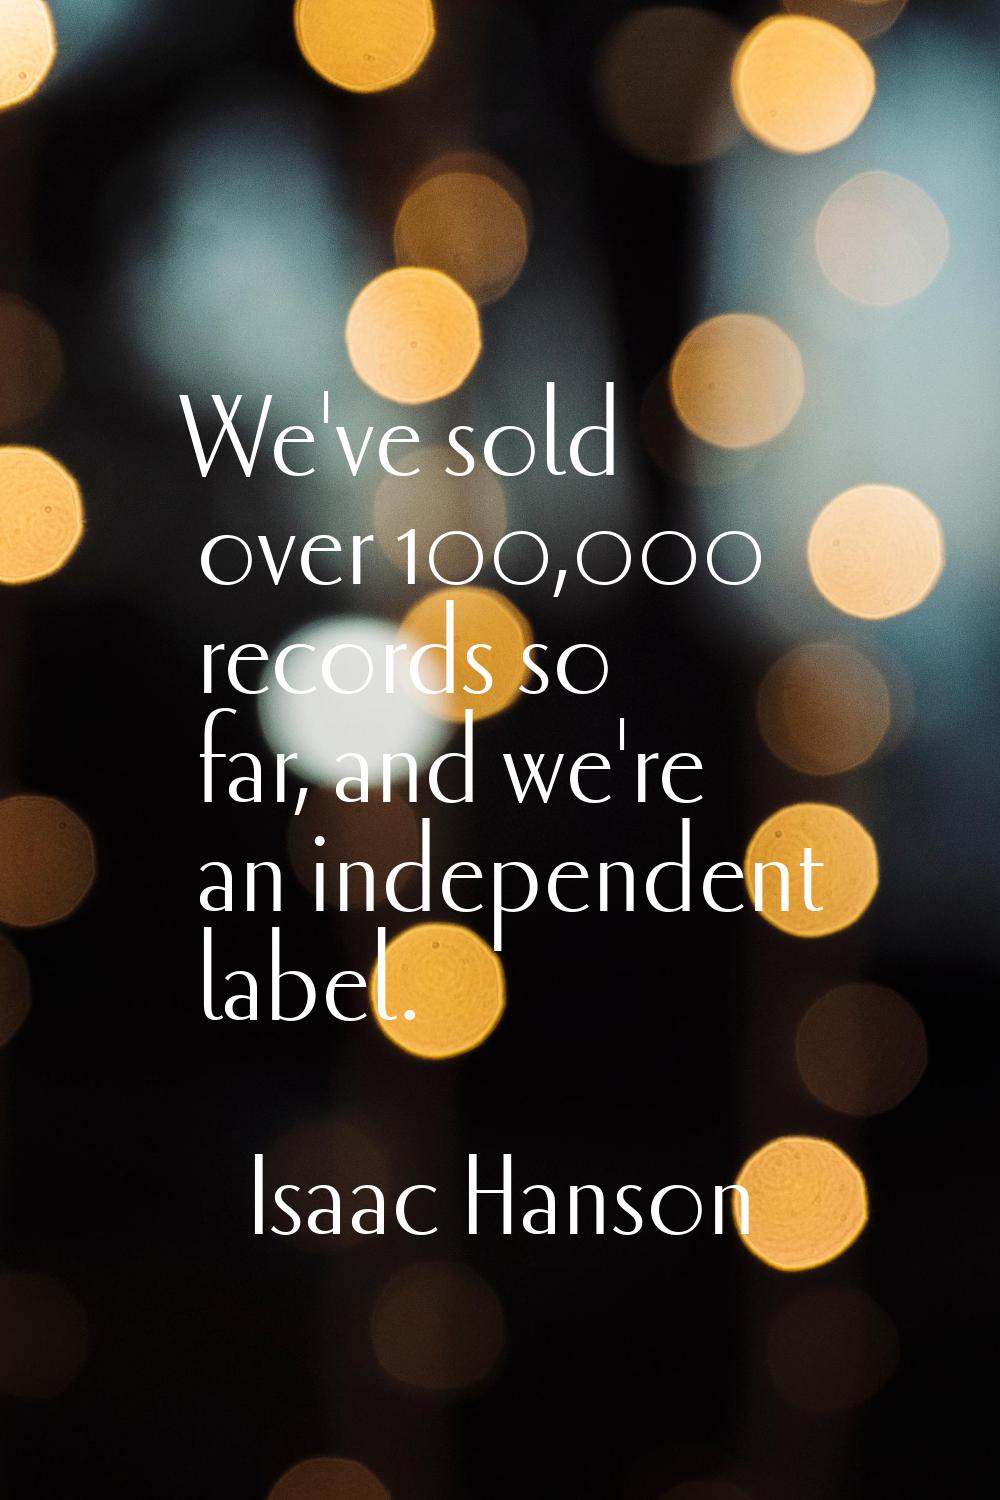 We've sold over 100,000 records so far, and we're an independent label.